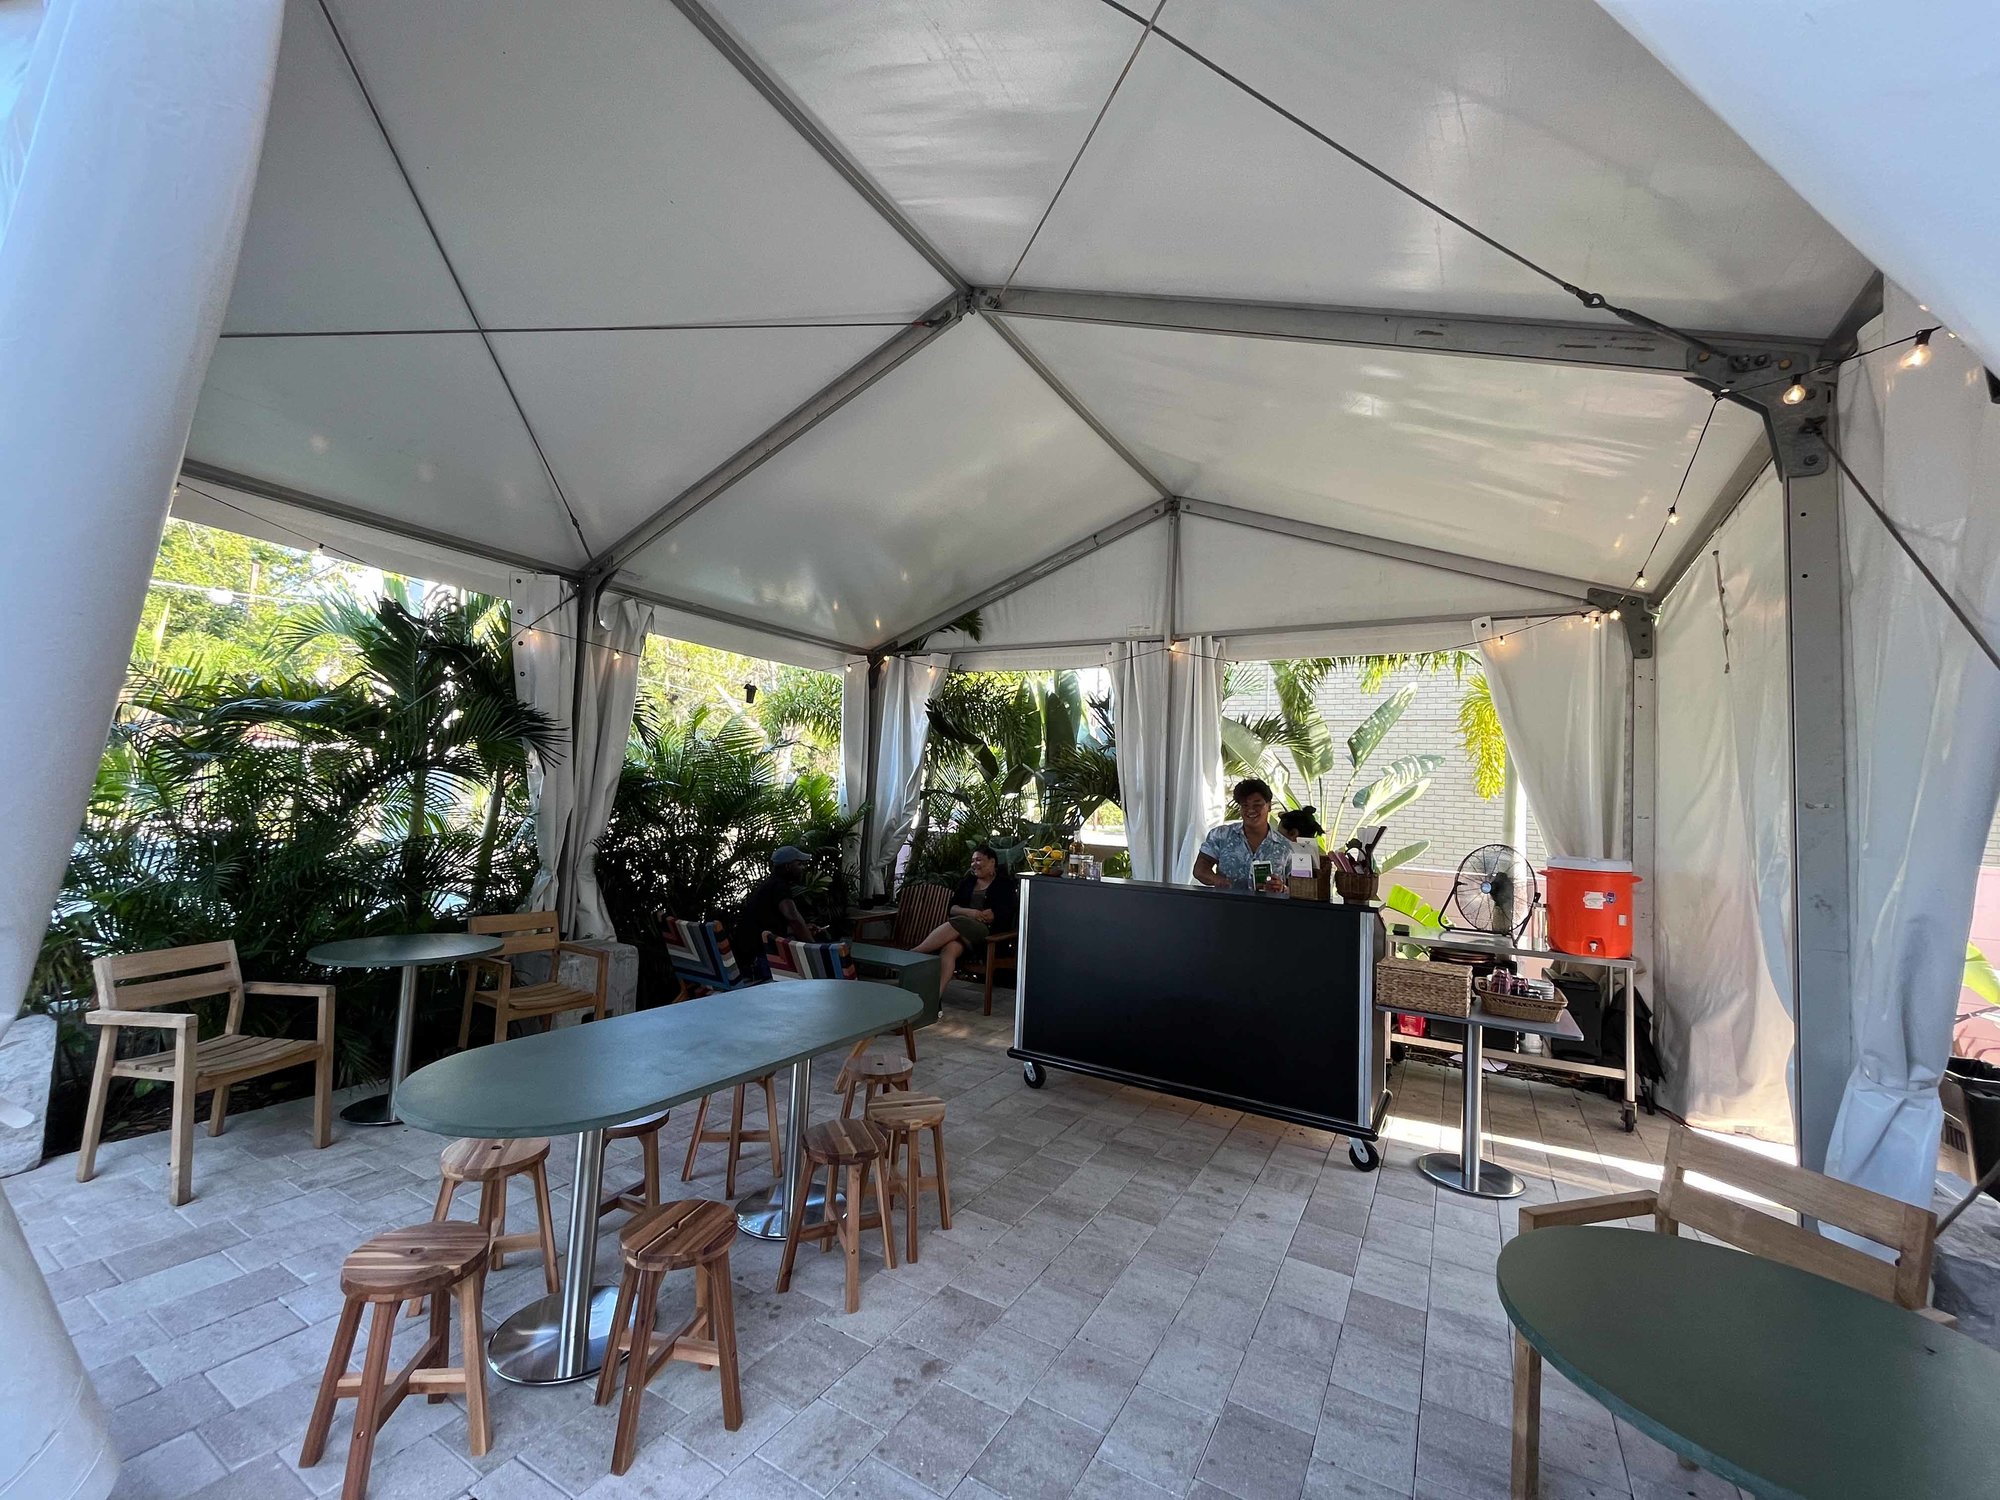 outdoor seating under a tent